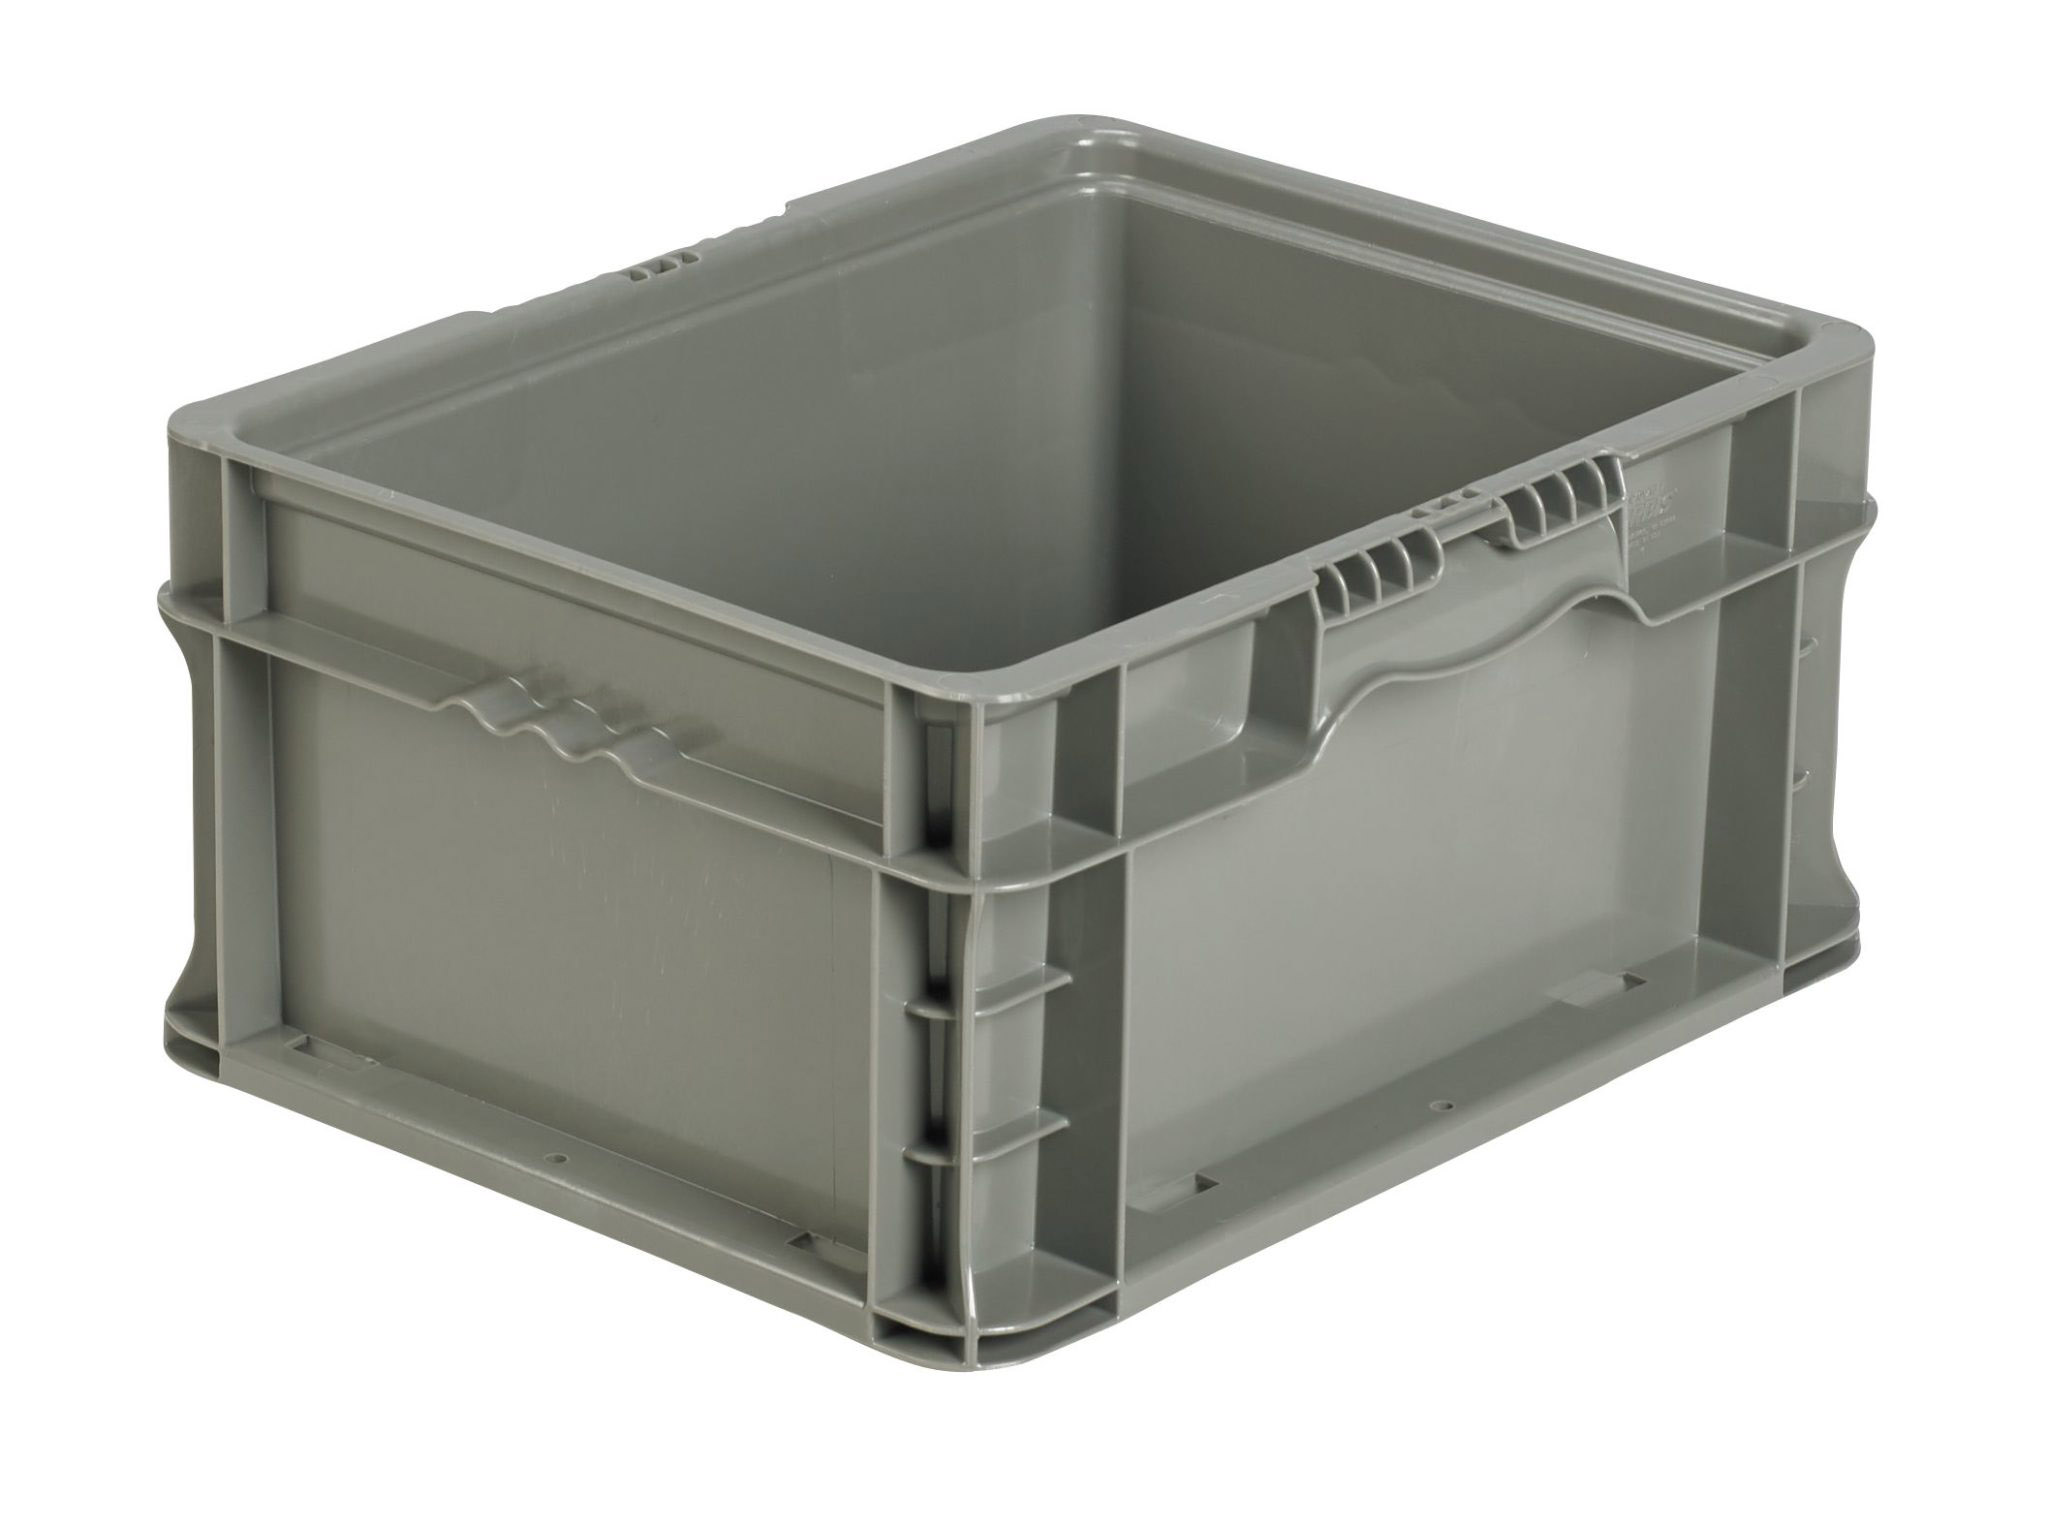 12 x 15 x 08 – Straight Wall Handheld Container